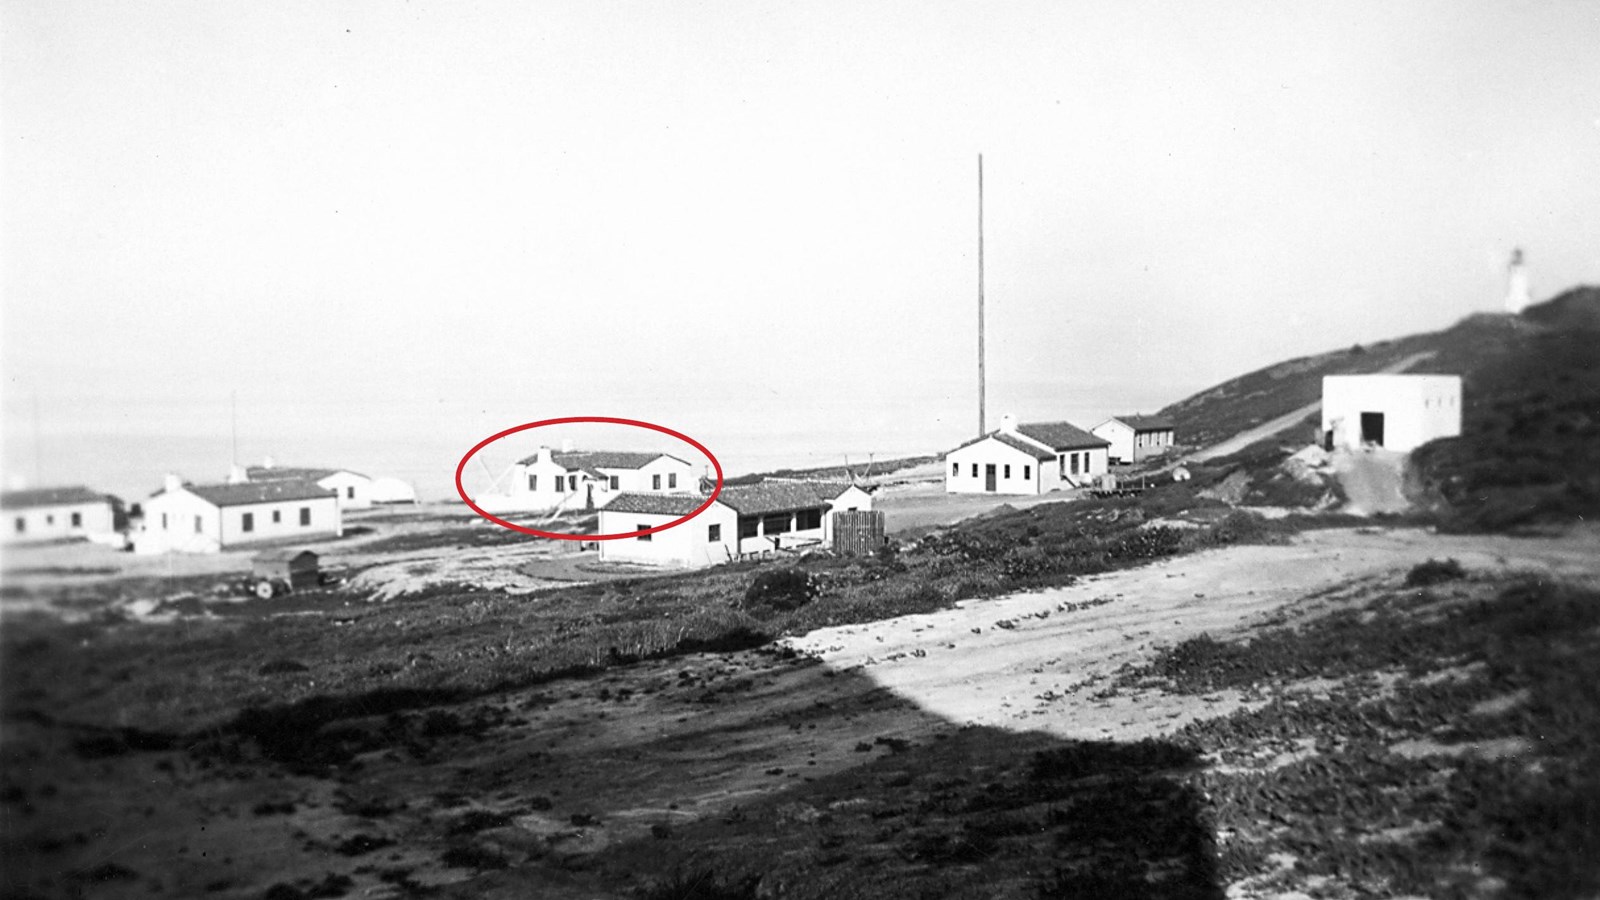 Historic photo lighthouse complex buildings. White buildings with red roofs.